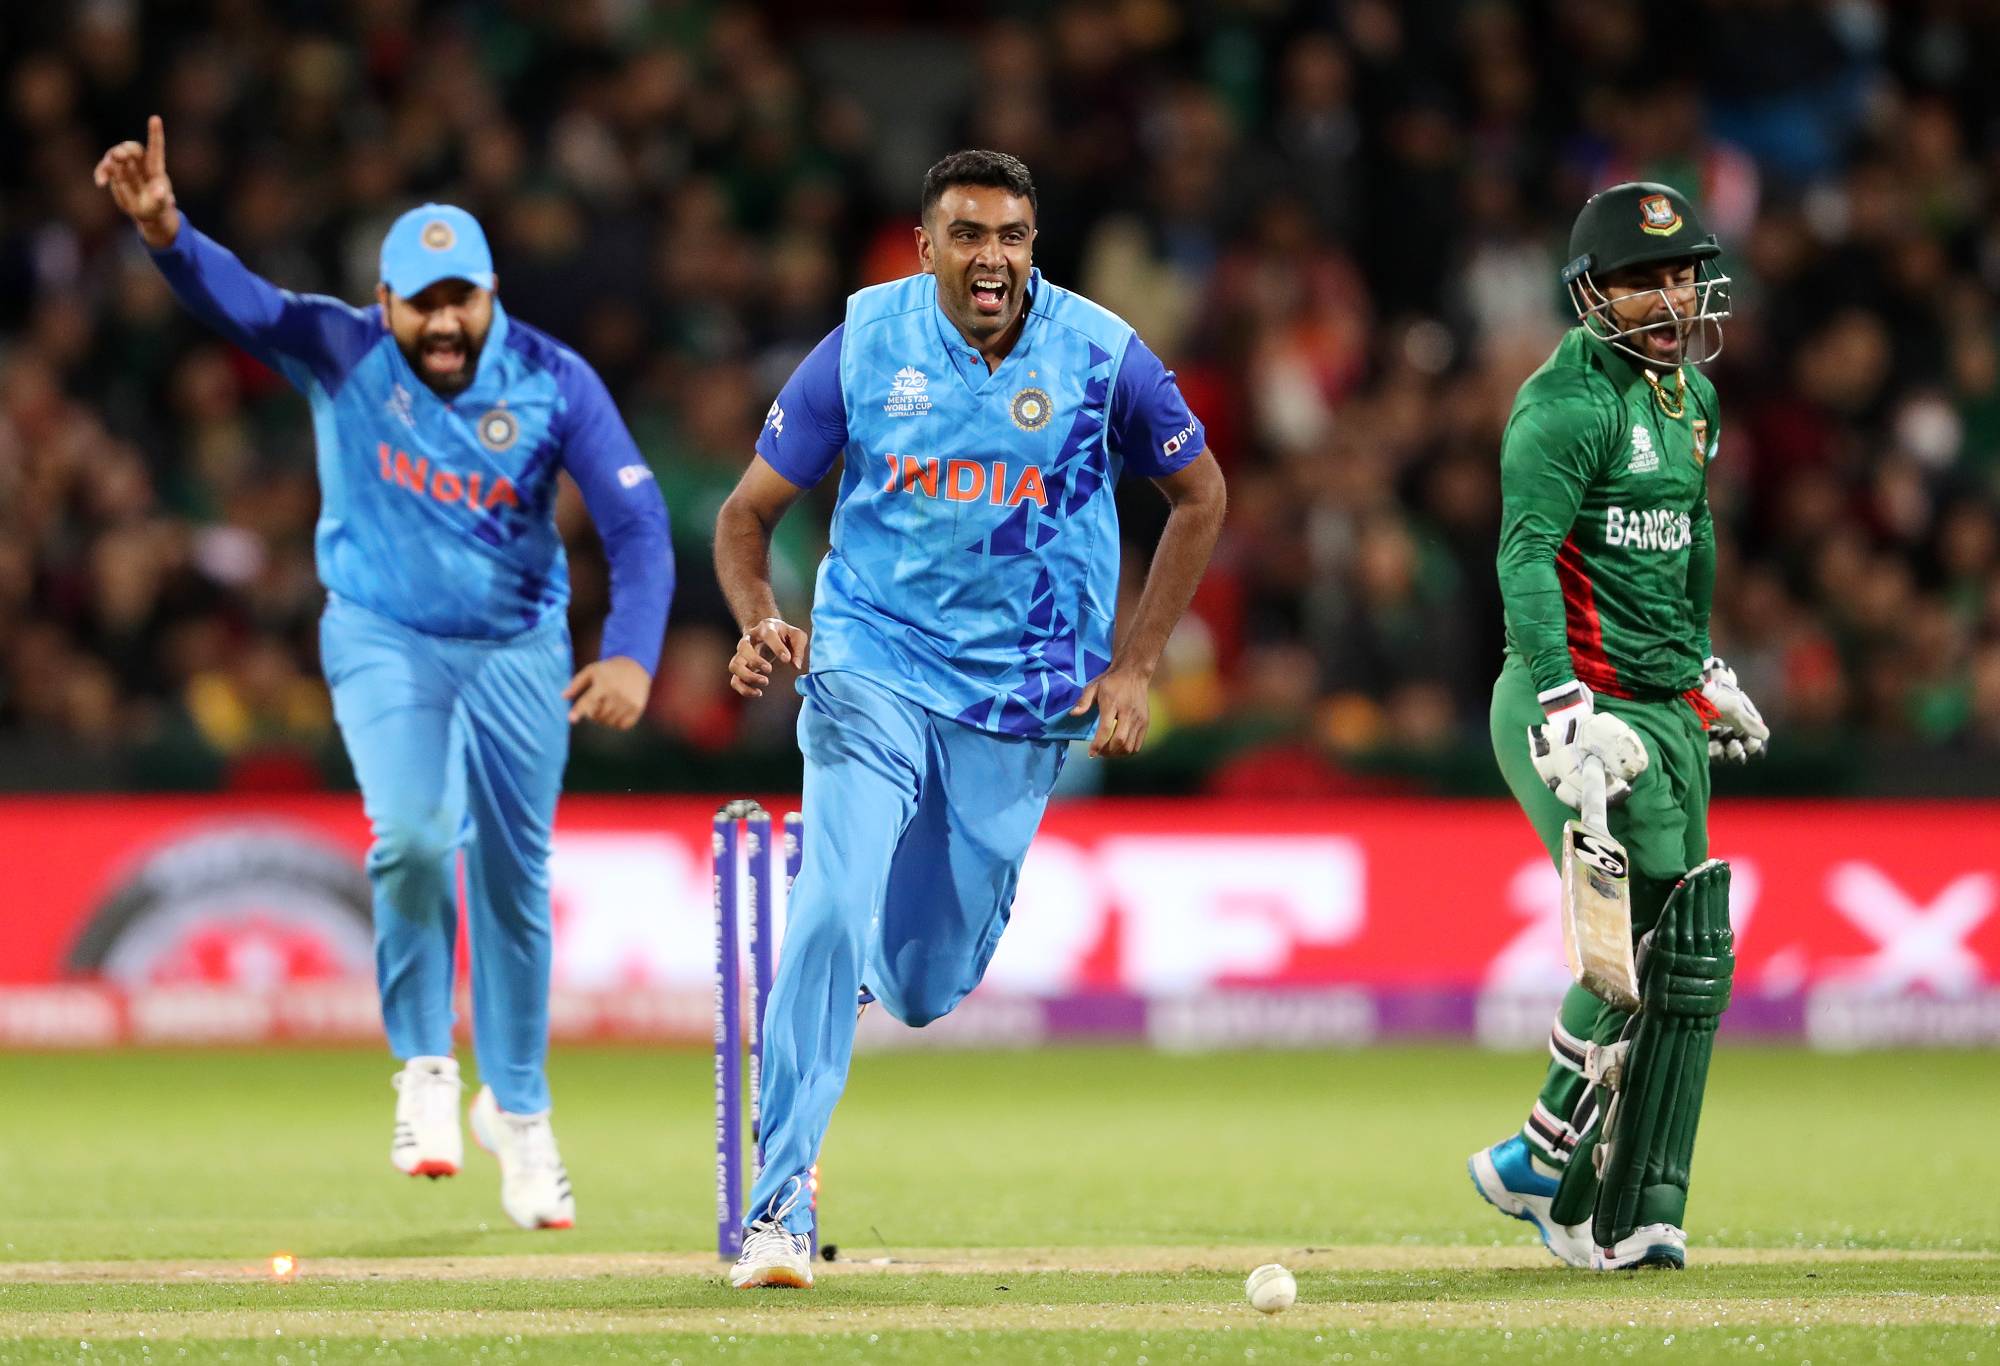 ADELAIDE, AUSTRALIA - NOVEMBER 02: Ravichandran Ashwin of India runs towards KL Rahul of India after he ran out of Litton Das of Bangladesh for 60 runs during the ICC Men's T20 World Cup match between India and Bangladesh at Adelaide Oval on November 02, 2022 in Adelaide, Australia. (Photo by Sarah Reed/Getty Images)